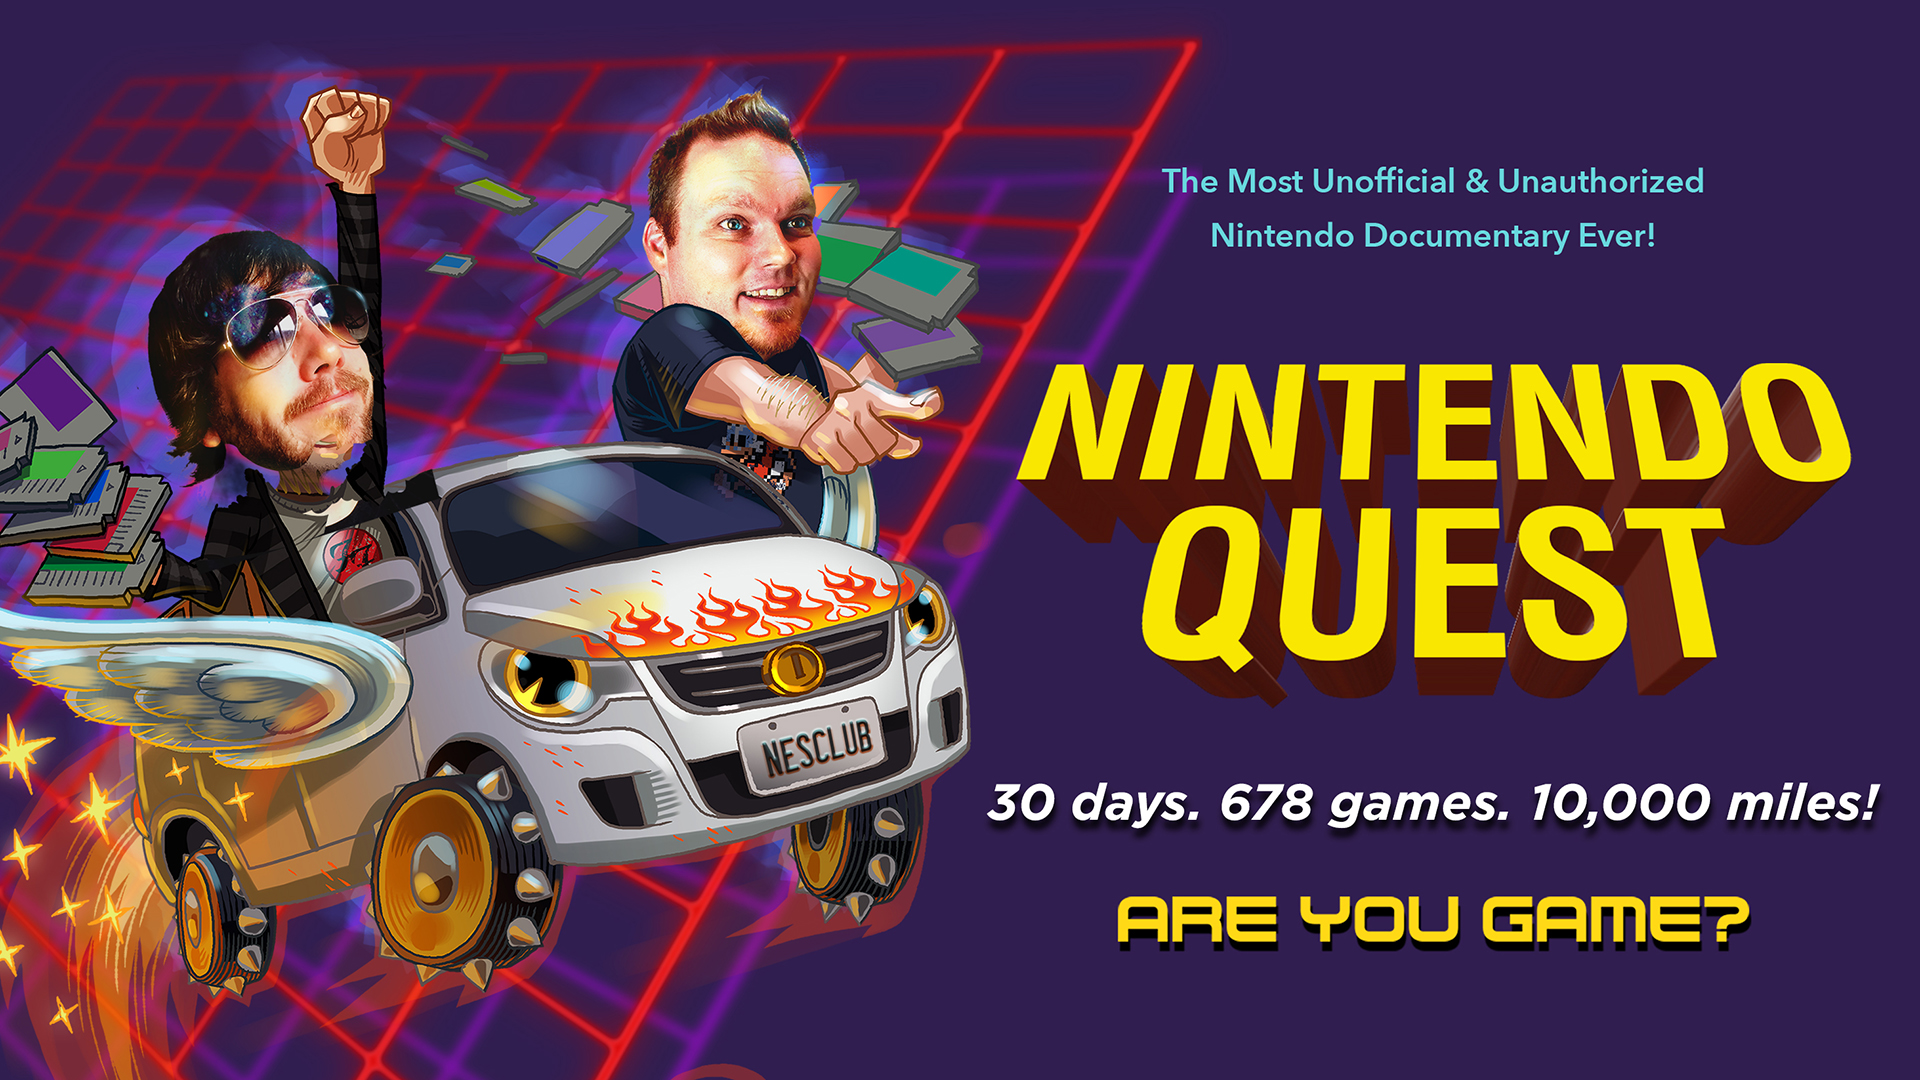 Nintendo Quest – A Fun Documentary for Video Game Fans